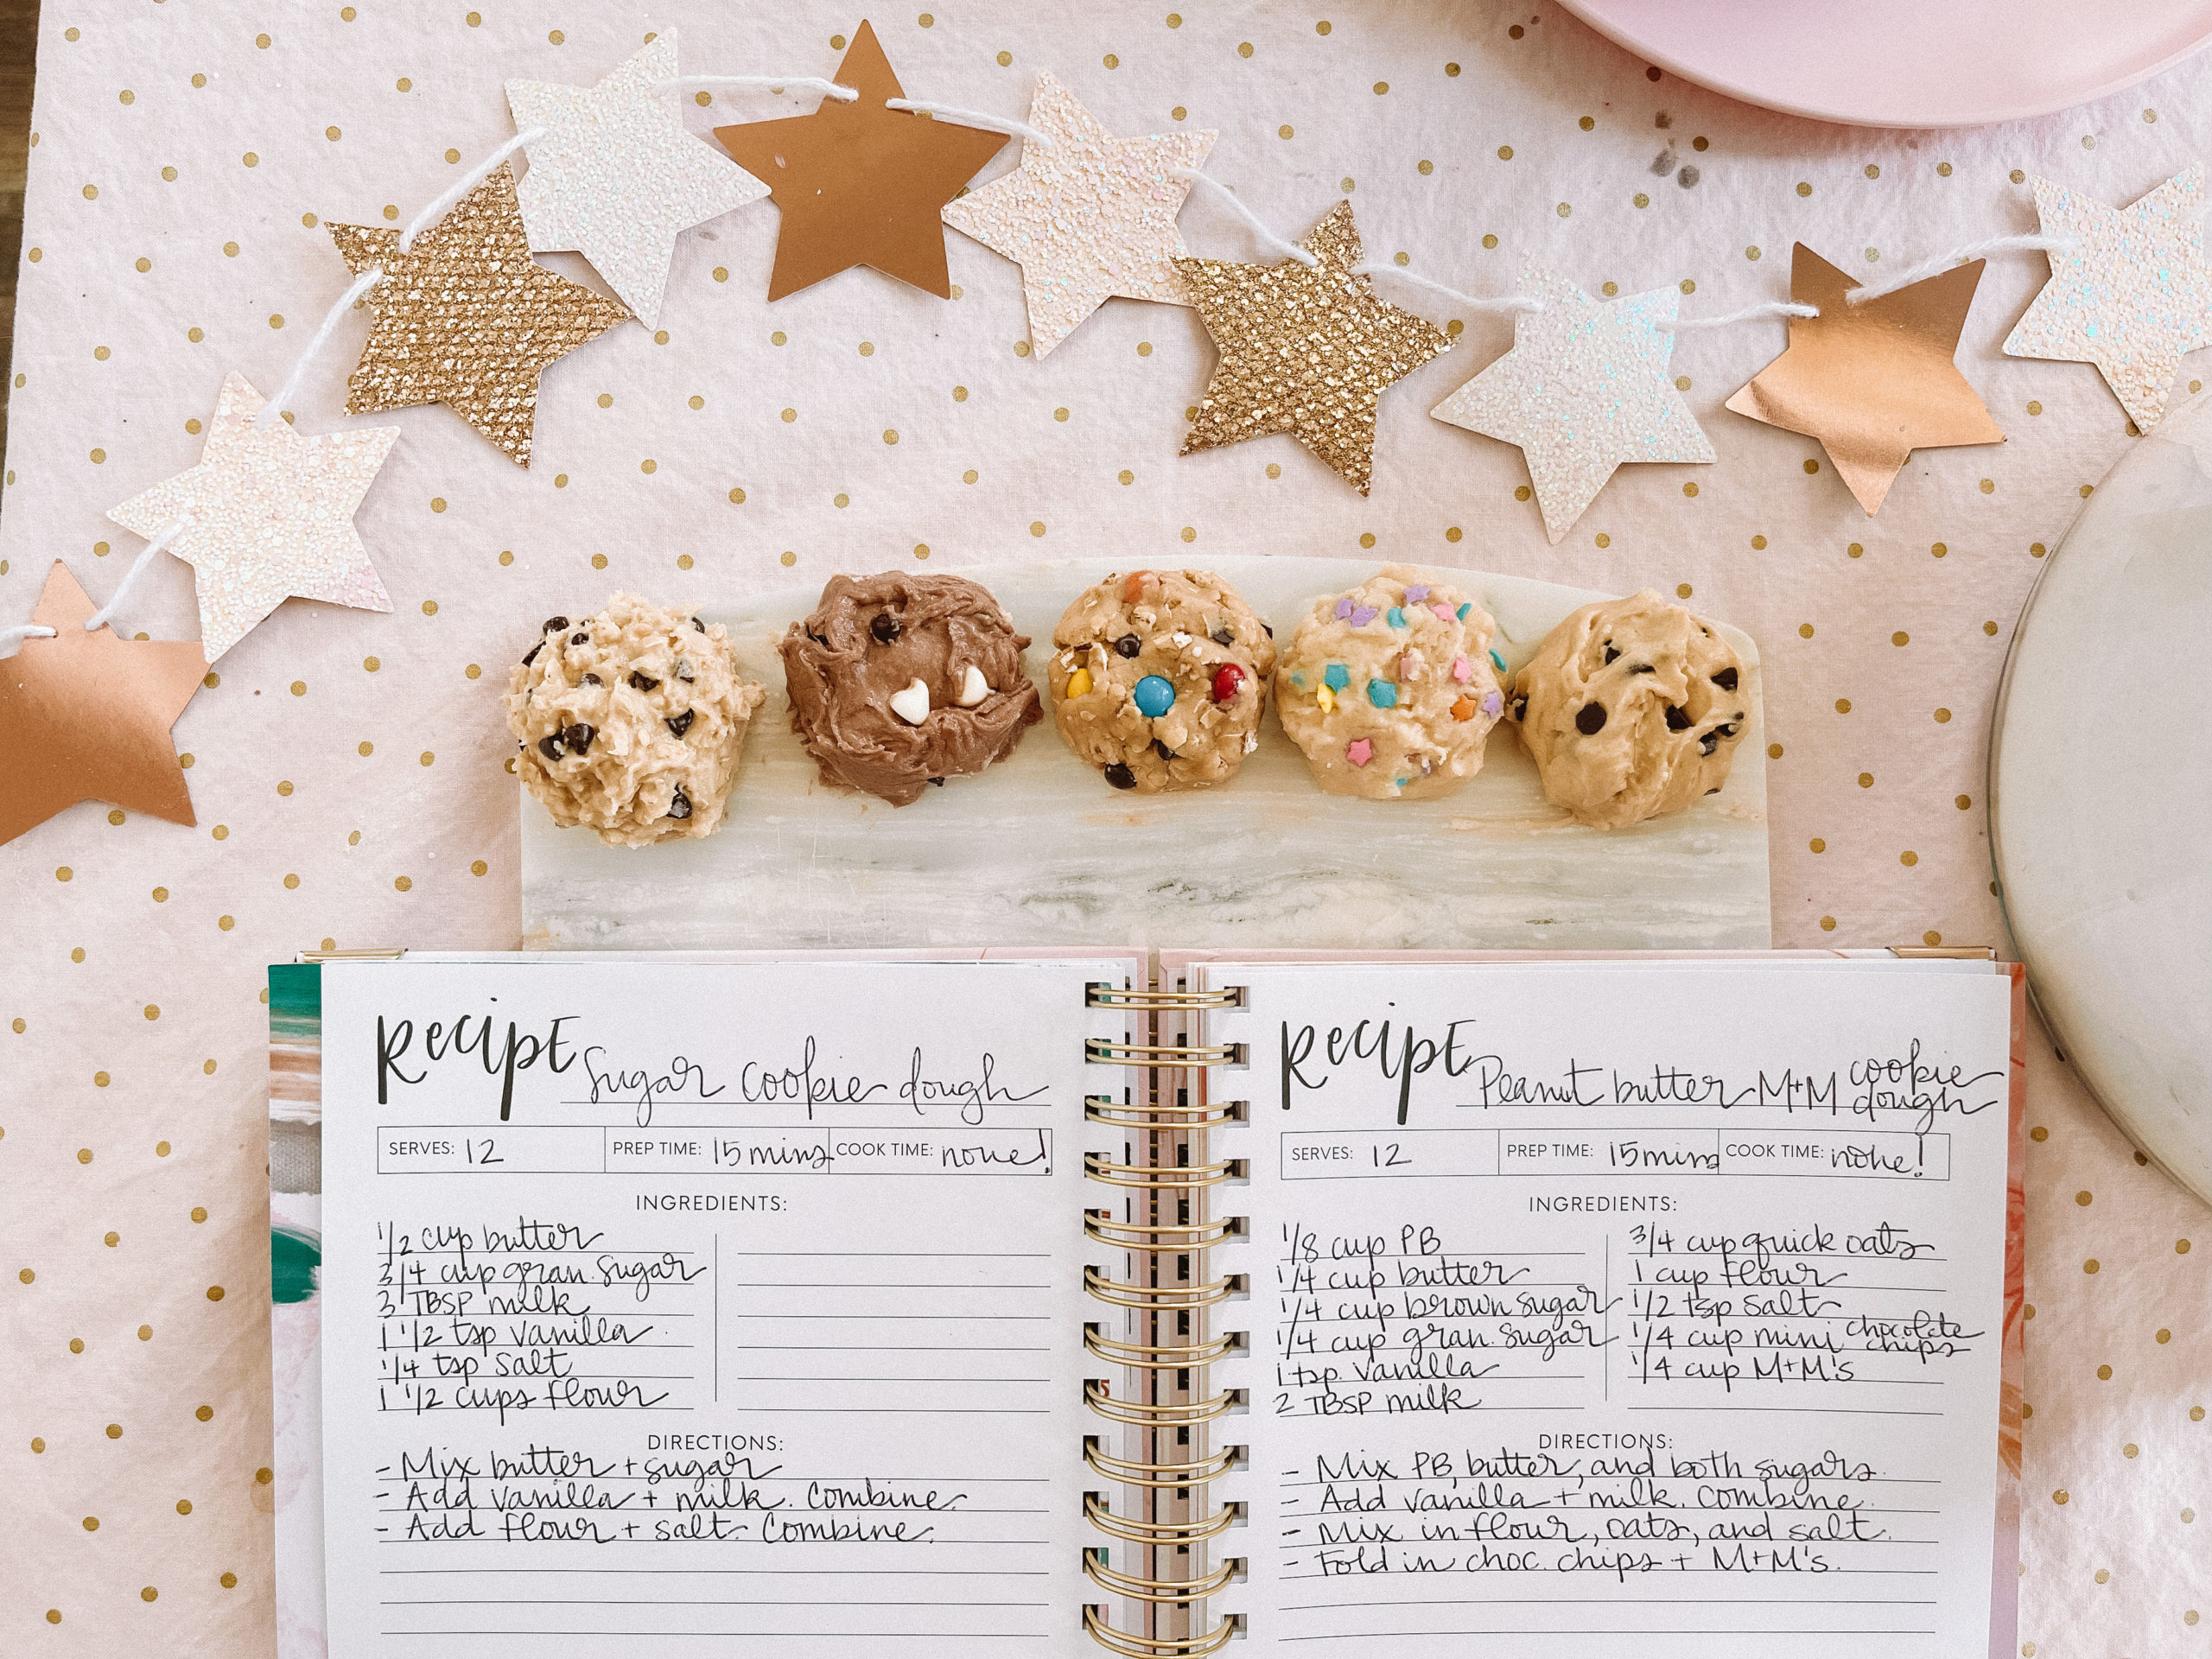 edible cookie dough recipe for onee